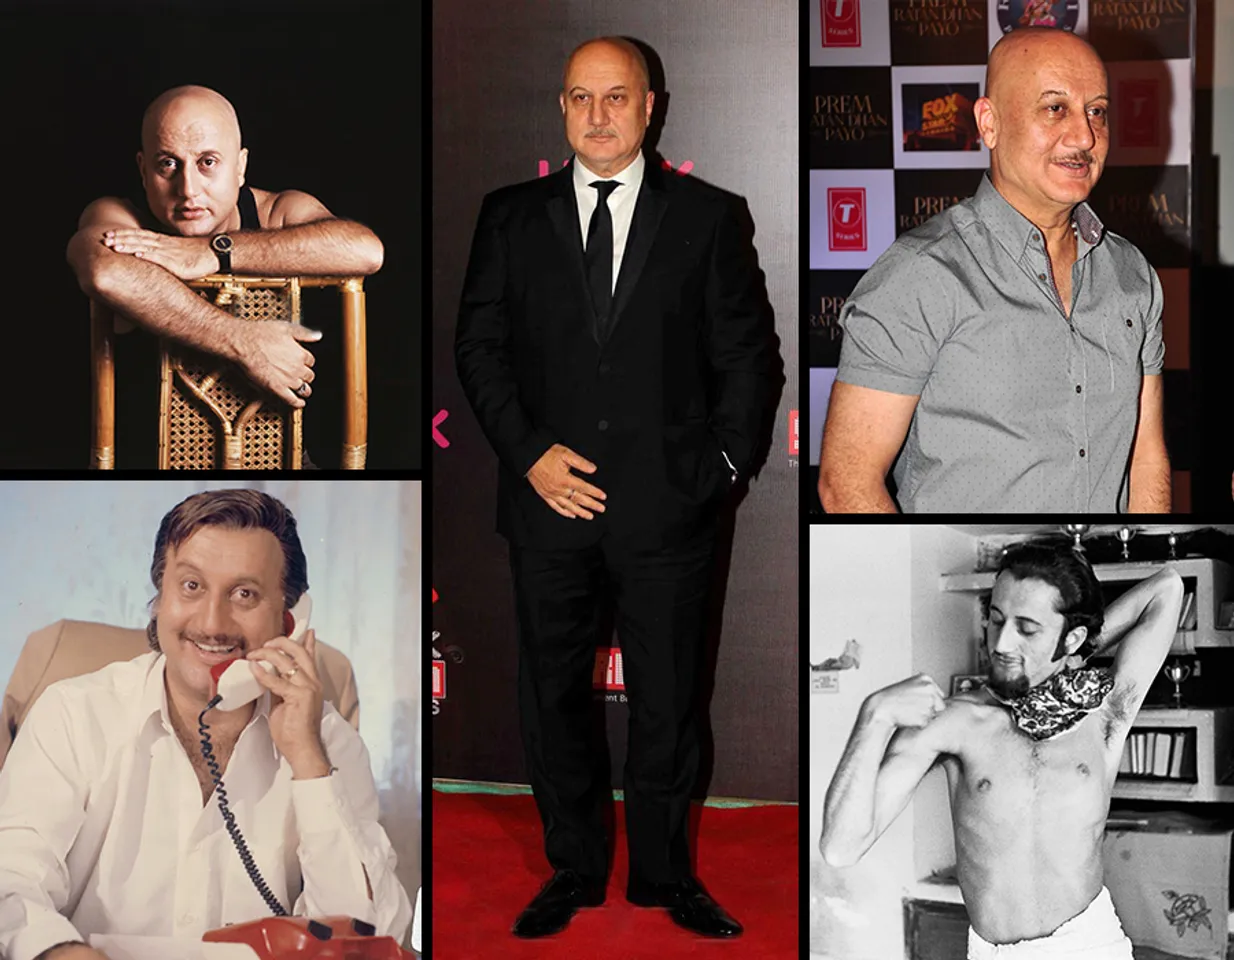 ANUPAM KHER: A LOOK AT THE LEGENDARY ACTOR'S REMARKABLE JOURNEY